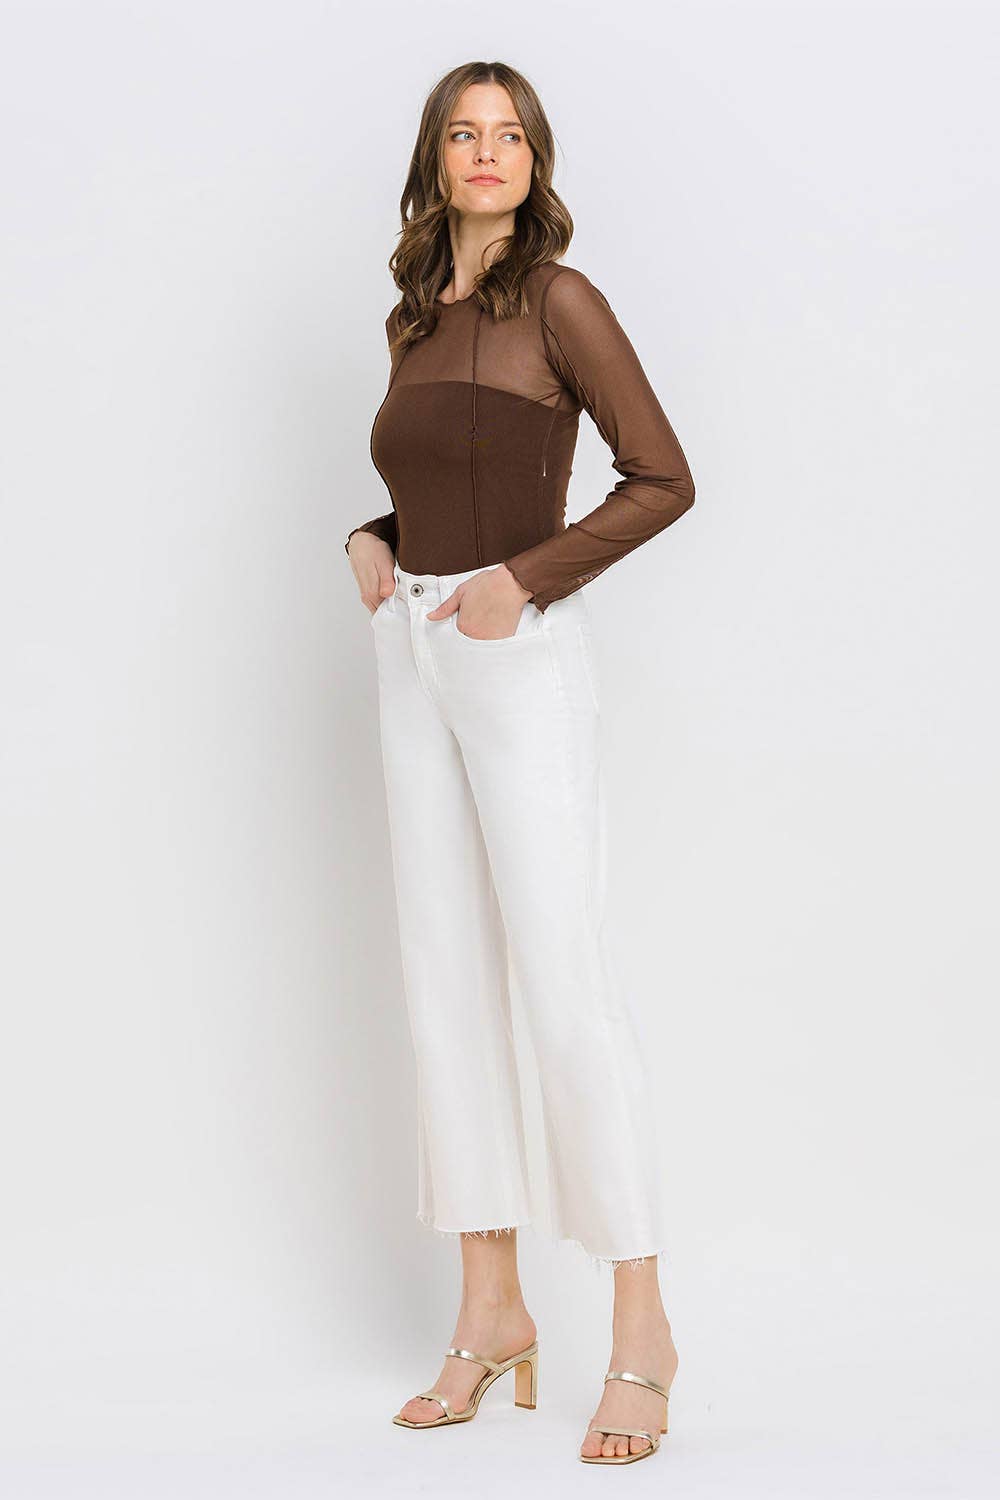 VERVET by FLYING MONKEY - HIGH RISE CROP WIDE LEG JEANS T5894WH: OPTIC WHITE / 32